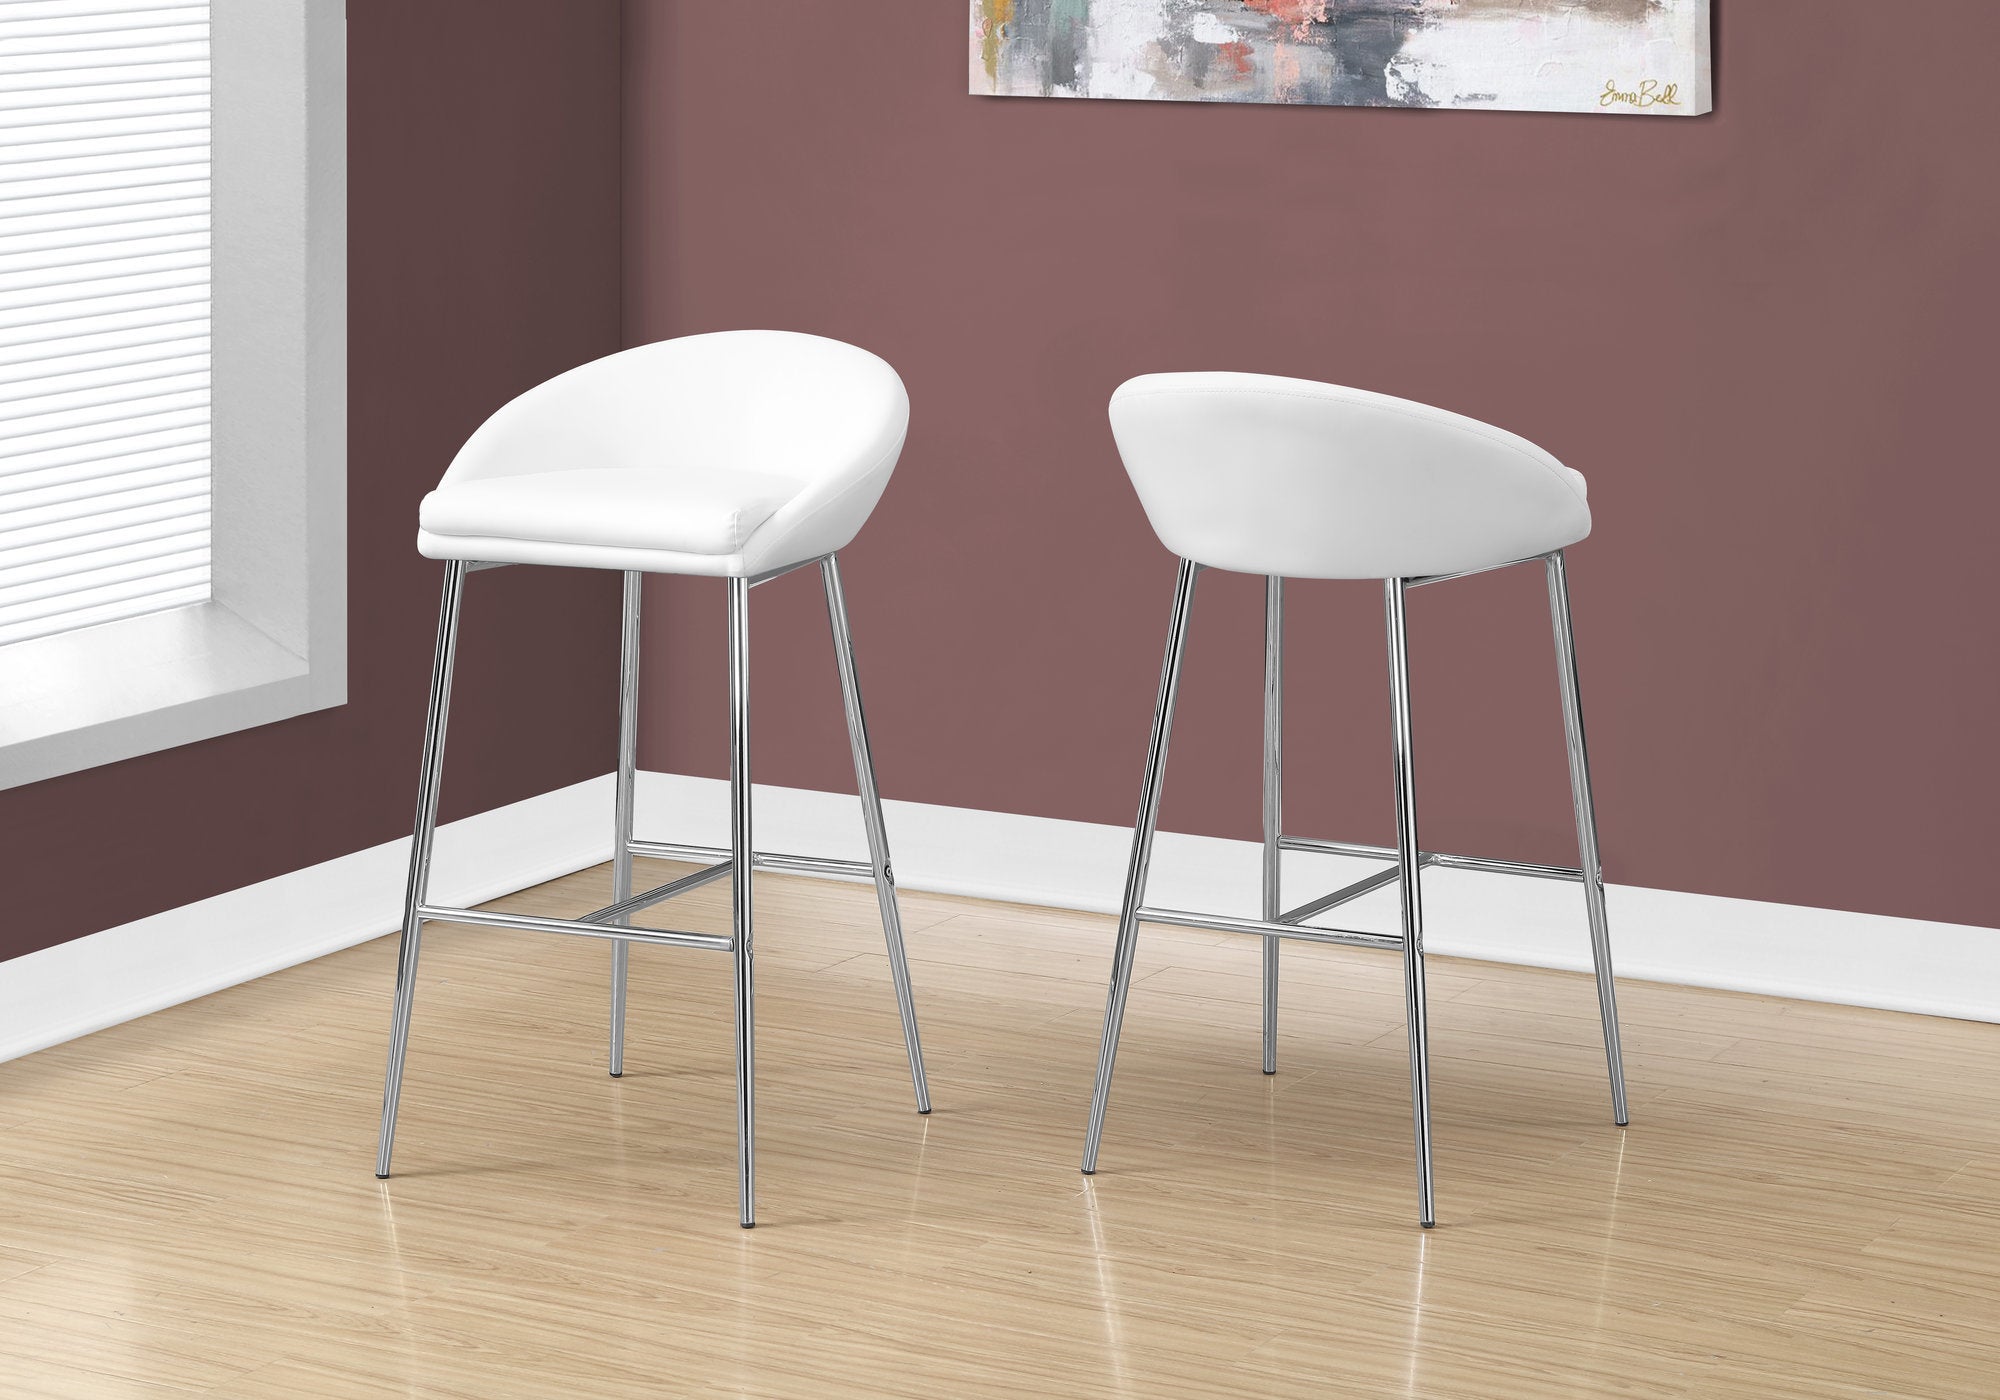 MN-692297    Bar Stool, Set Of 2, Bar Height, Metal, Leather Look, White, Black, Contemporary, Modern